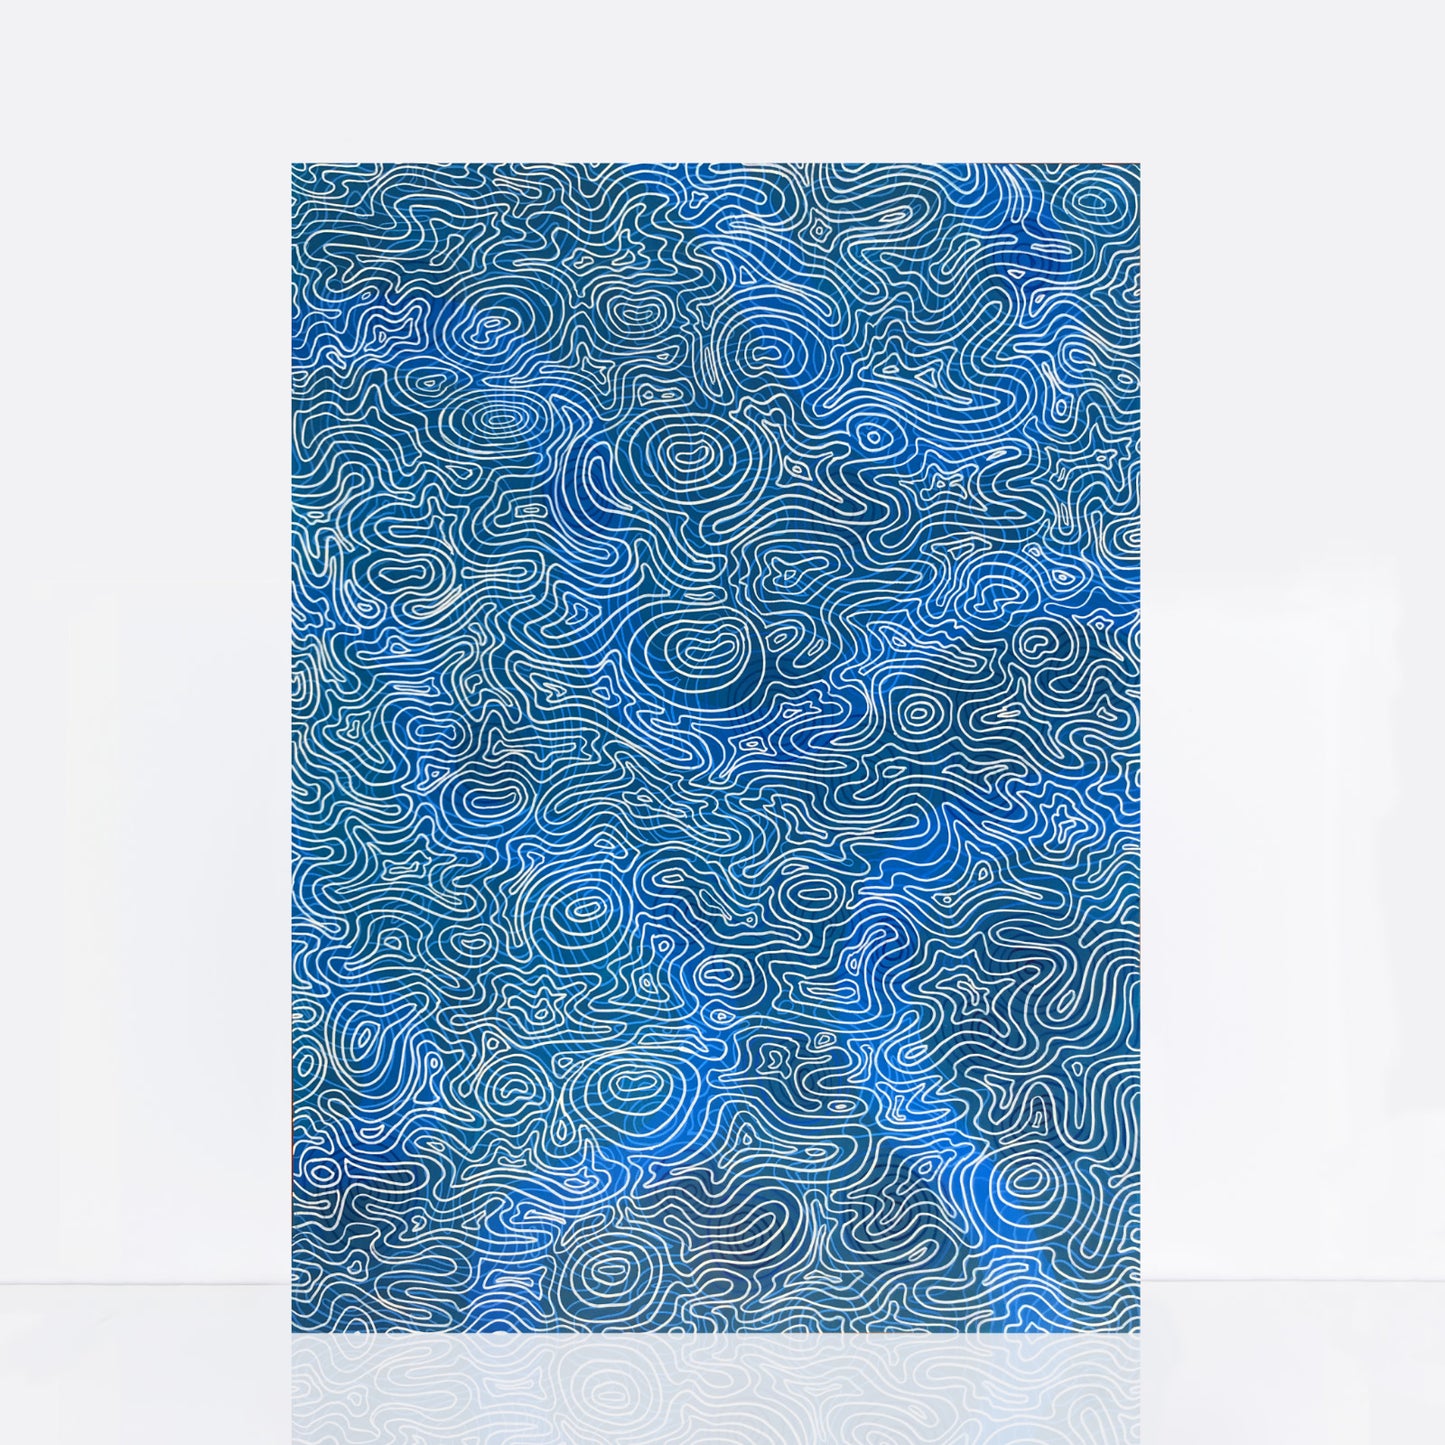 blue acrylic painting with lines and shapes that look like water ripples